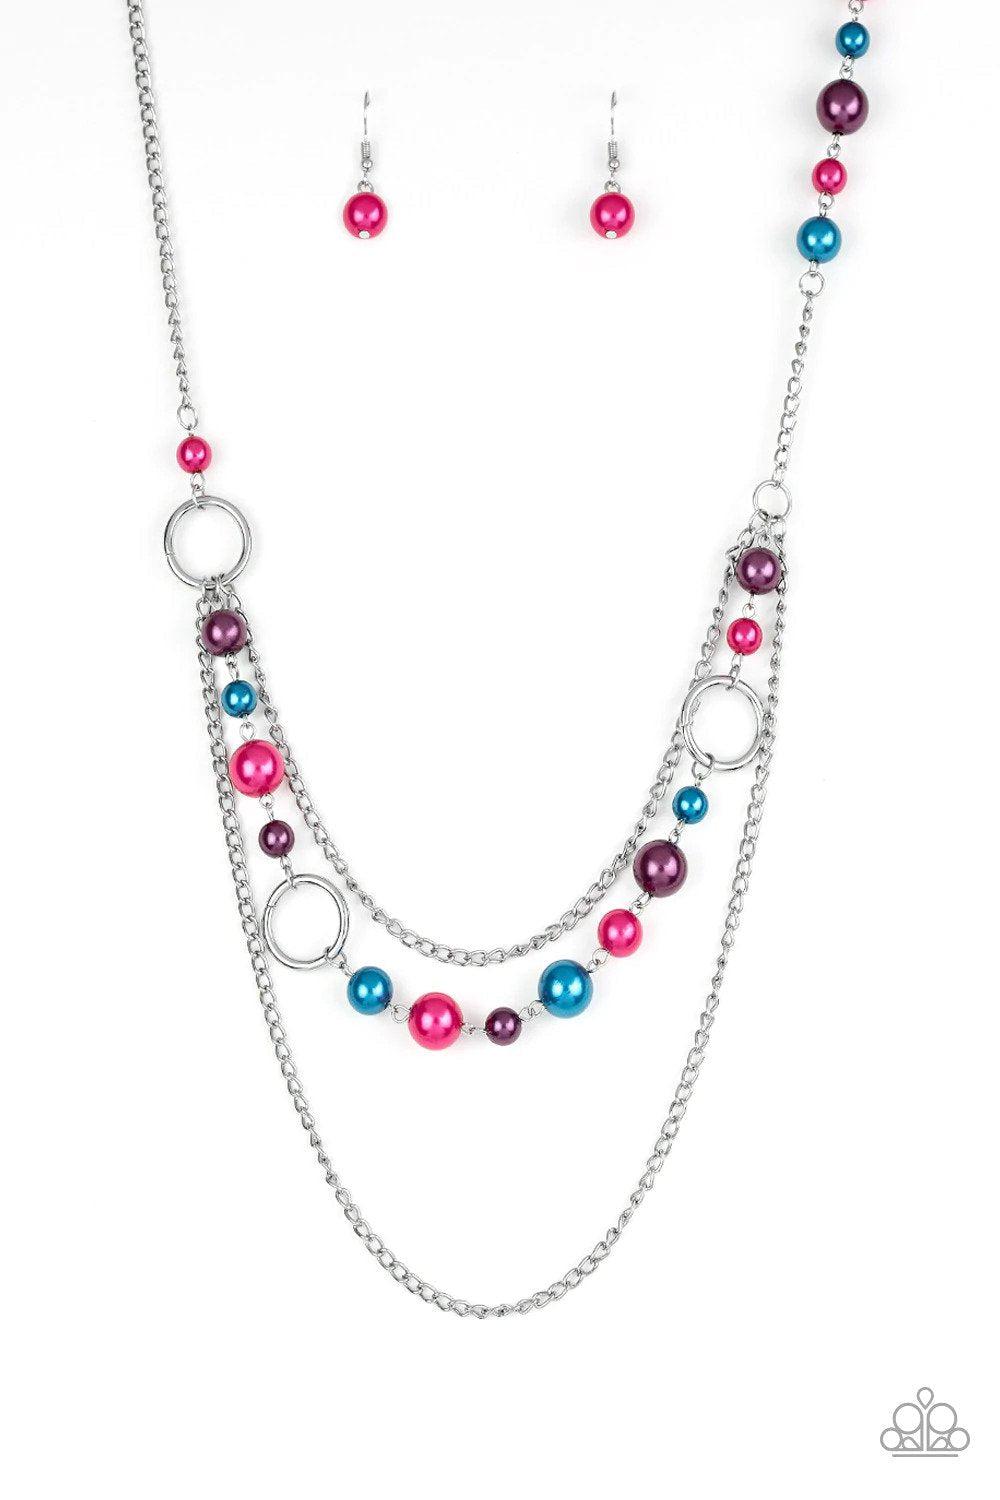 Party Dress Princess Multi Necklace - Paparazzi Accessories- lightbox - CarasShop.com - $5 Jewelry by Cara Jewels